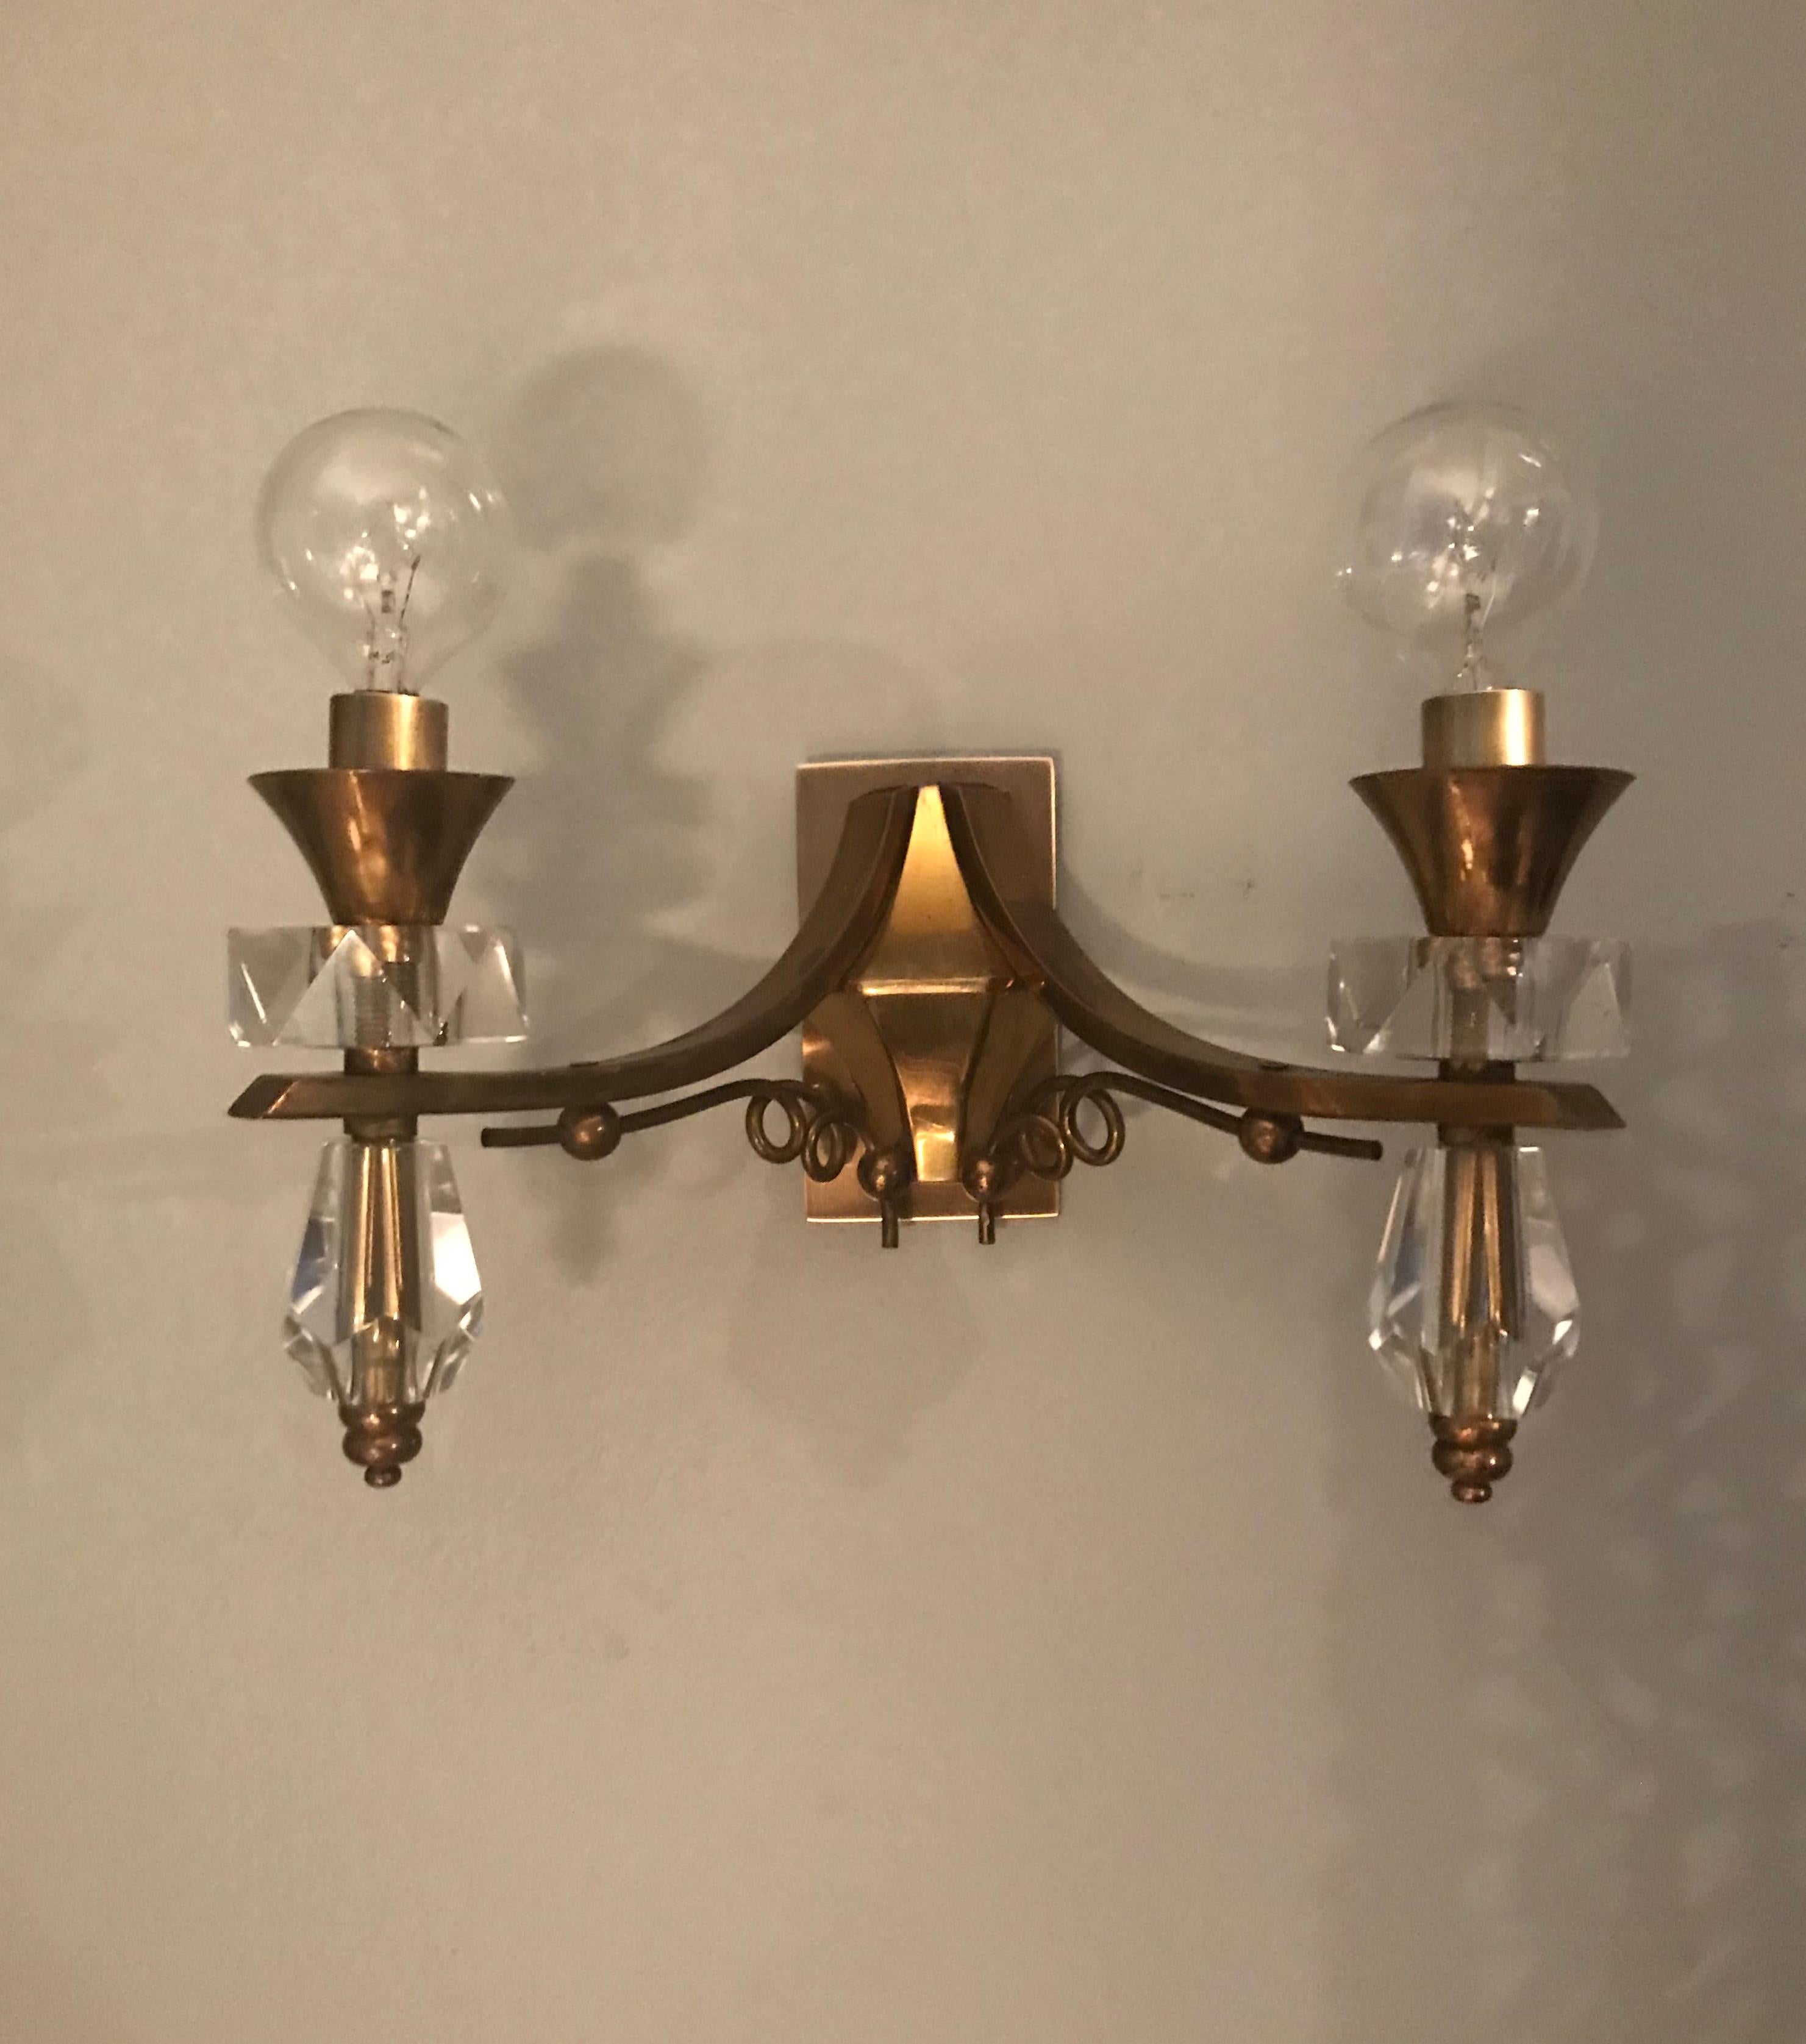 Mid-Century Modern Italian brass sconce. Vintage brass and thick cut faceted glass two-light sconce. Newly electrified and supplied with matching brass backplate ready to install. Italy, late 1940s.
Dimensions: 10.5